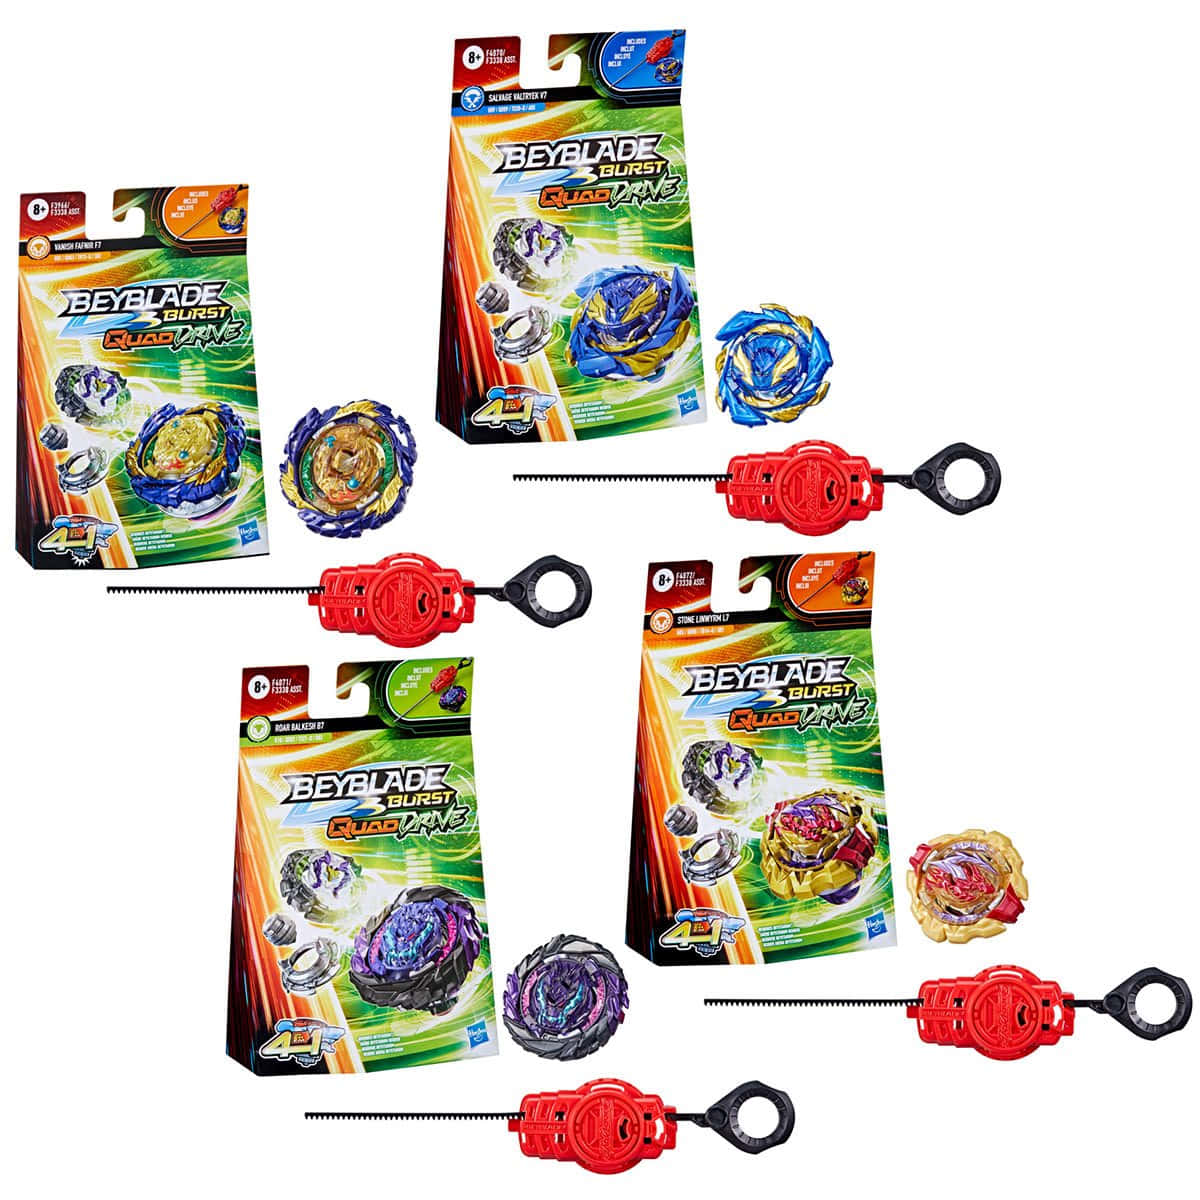 Bringing Beyblade into a Whole New Dimension of Fun